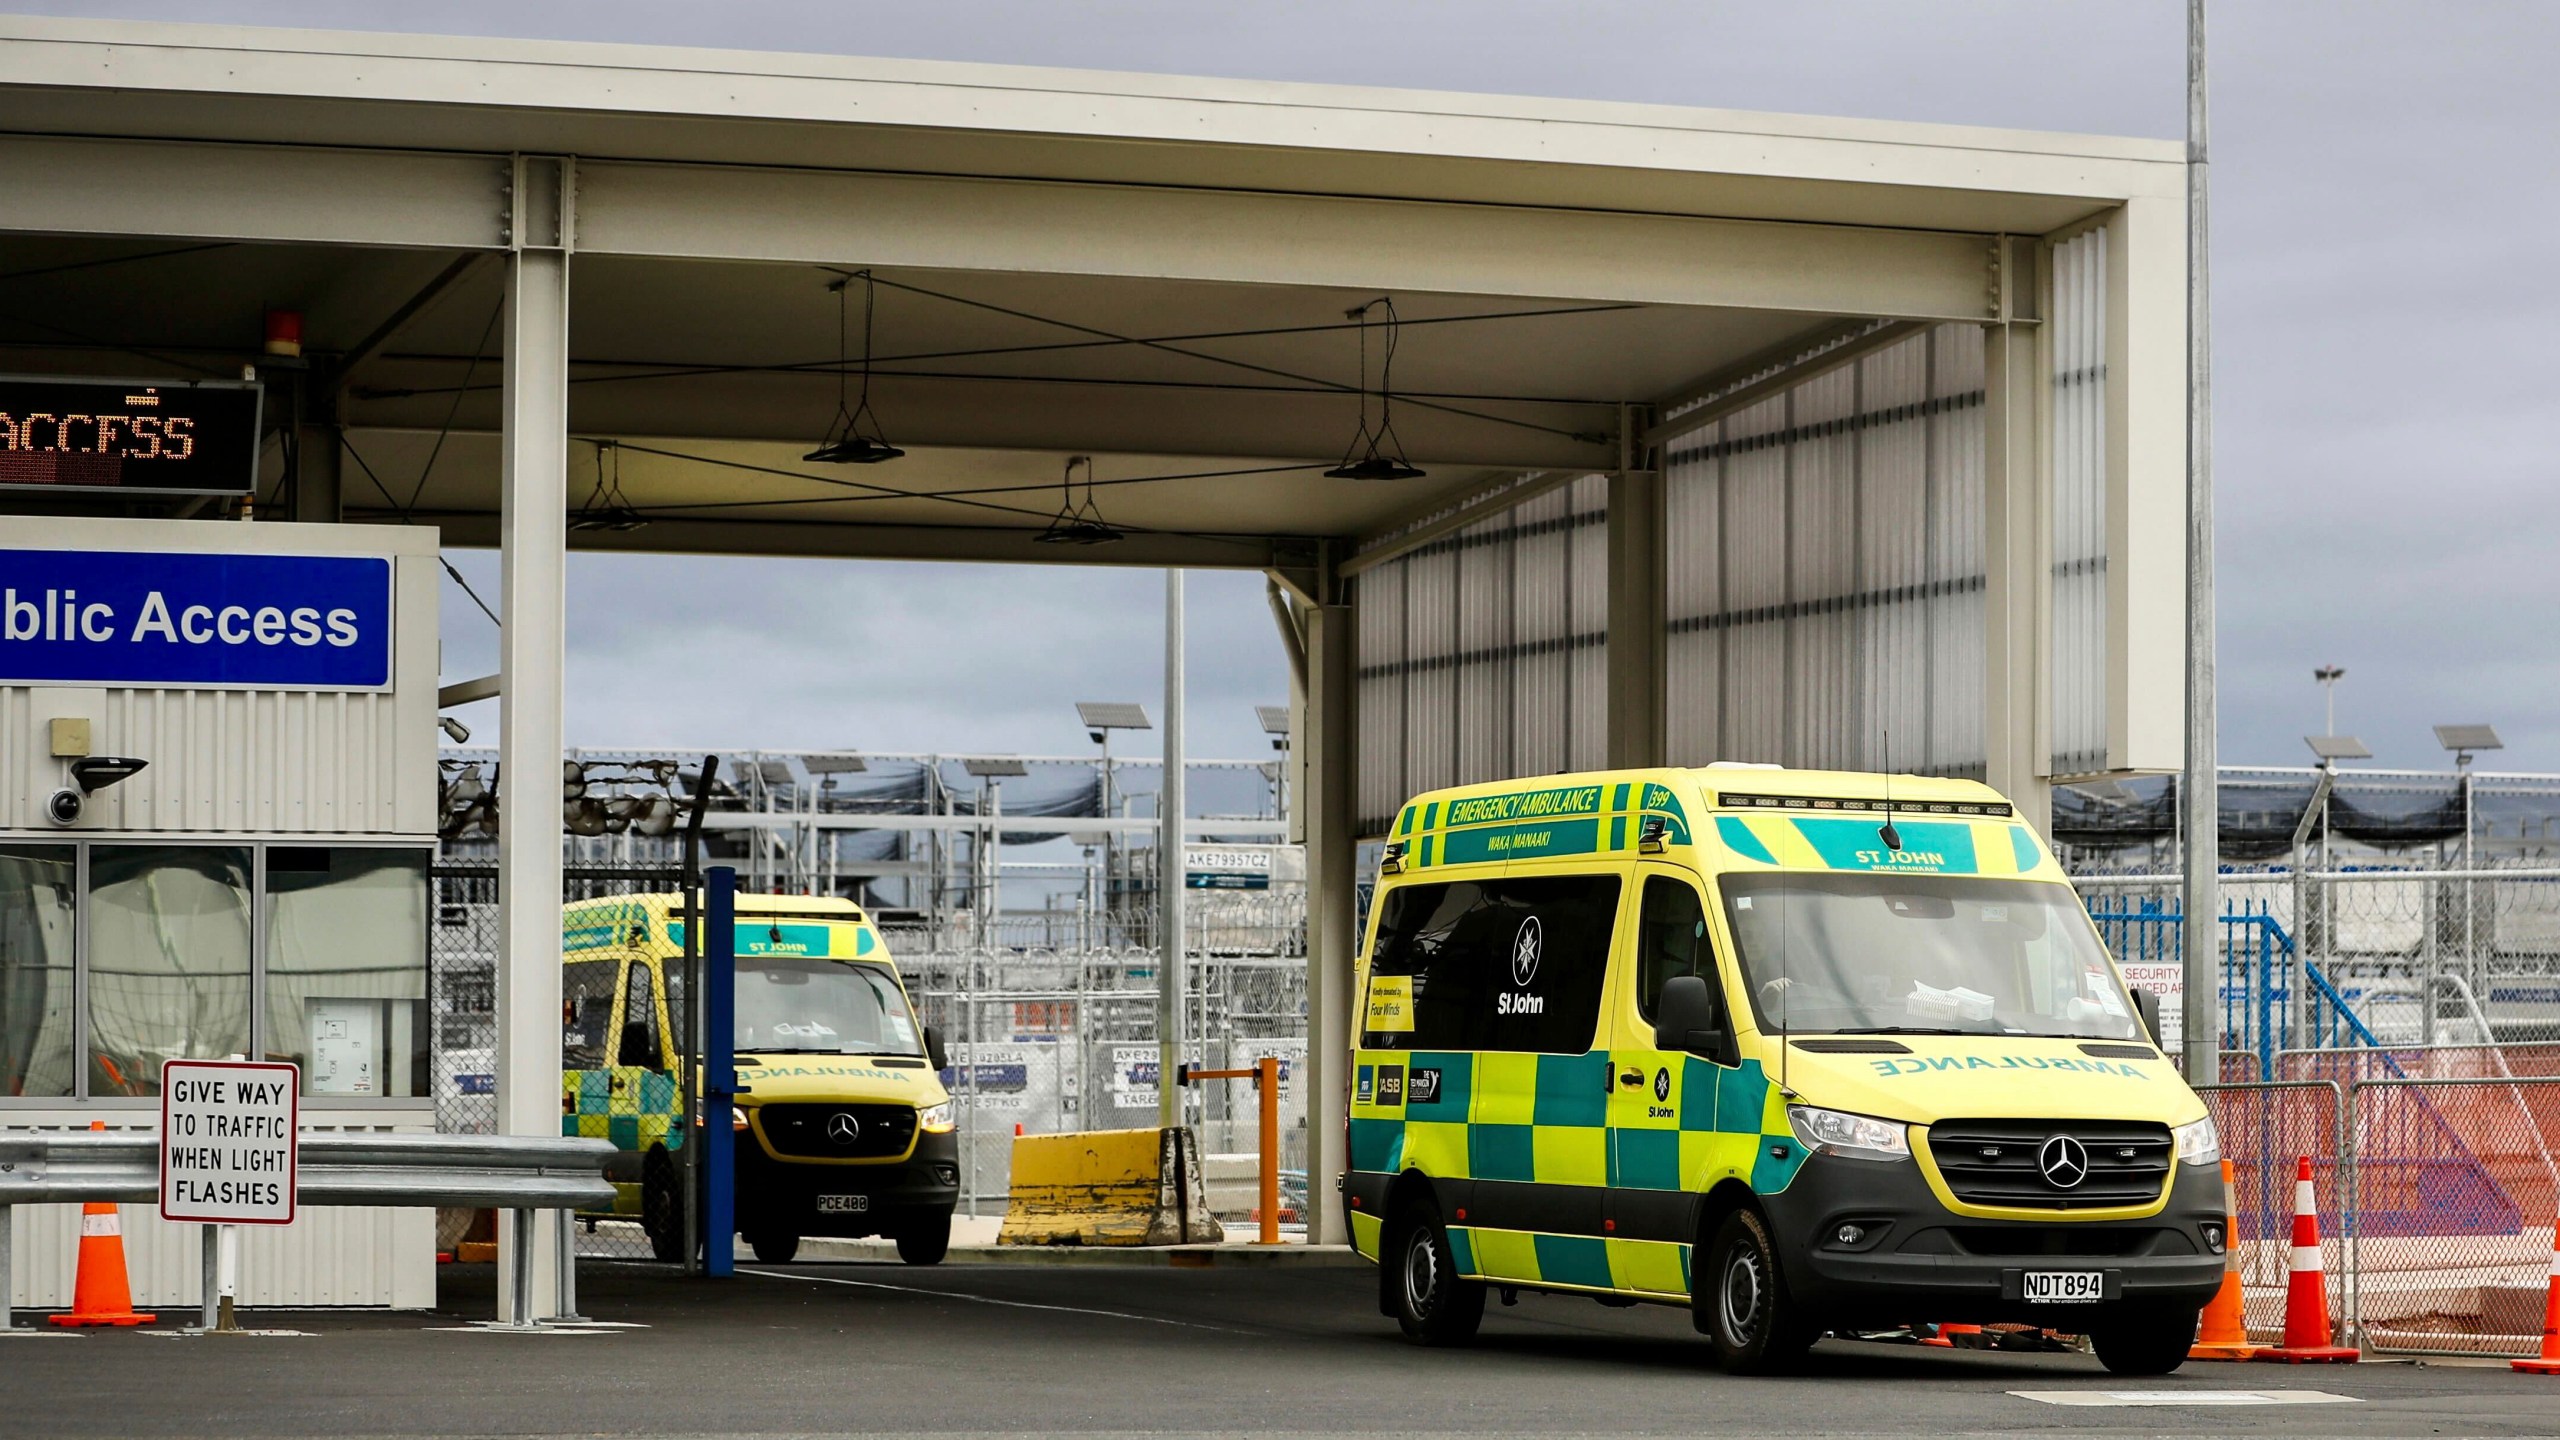 Ambulances leave Auckland International in Auckland, New Zealand, Monday, March 11, 2024. More than 20 people were injured after what officials described as a "technical event" on a Chilean plane traveling from Sydney, Australia to Auckland. (Dean Purcell/New Zealand Herald via AP)